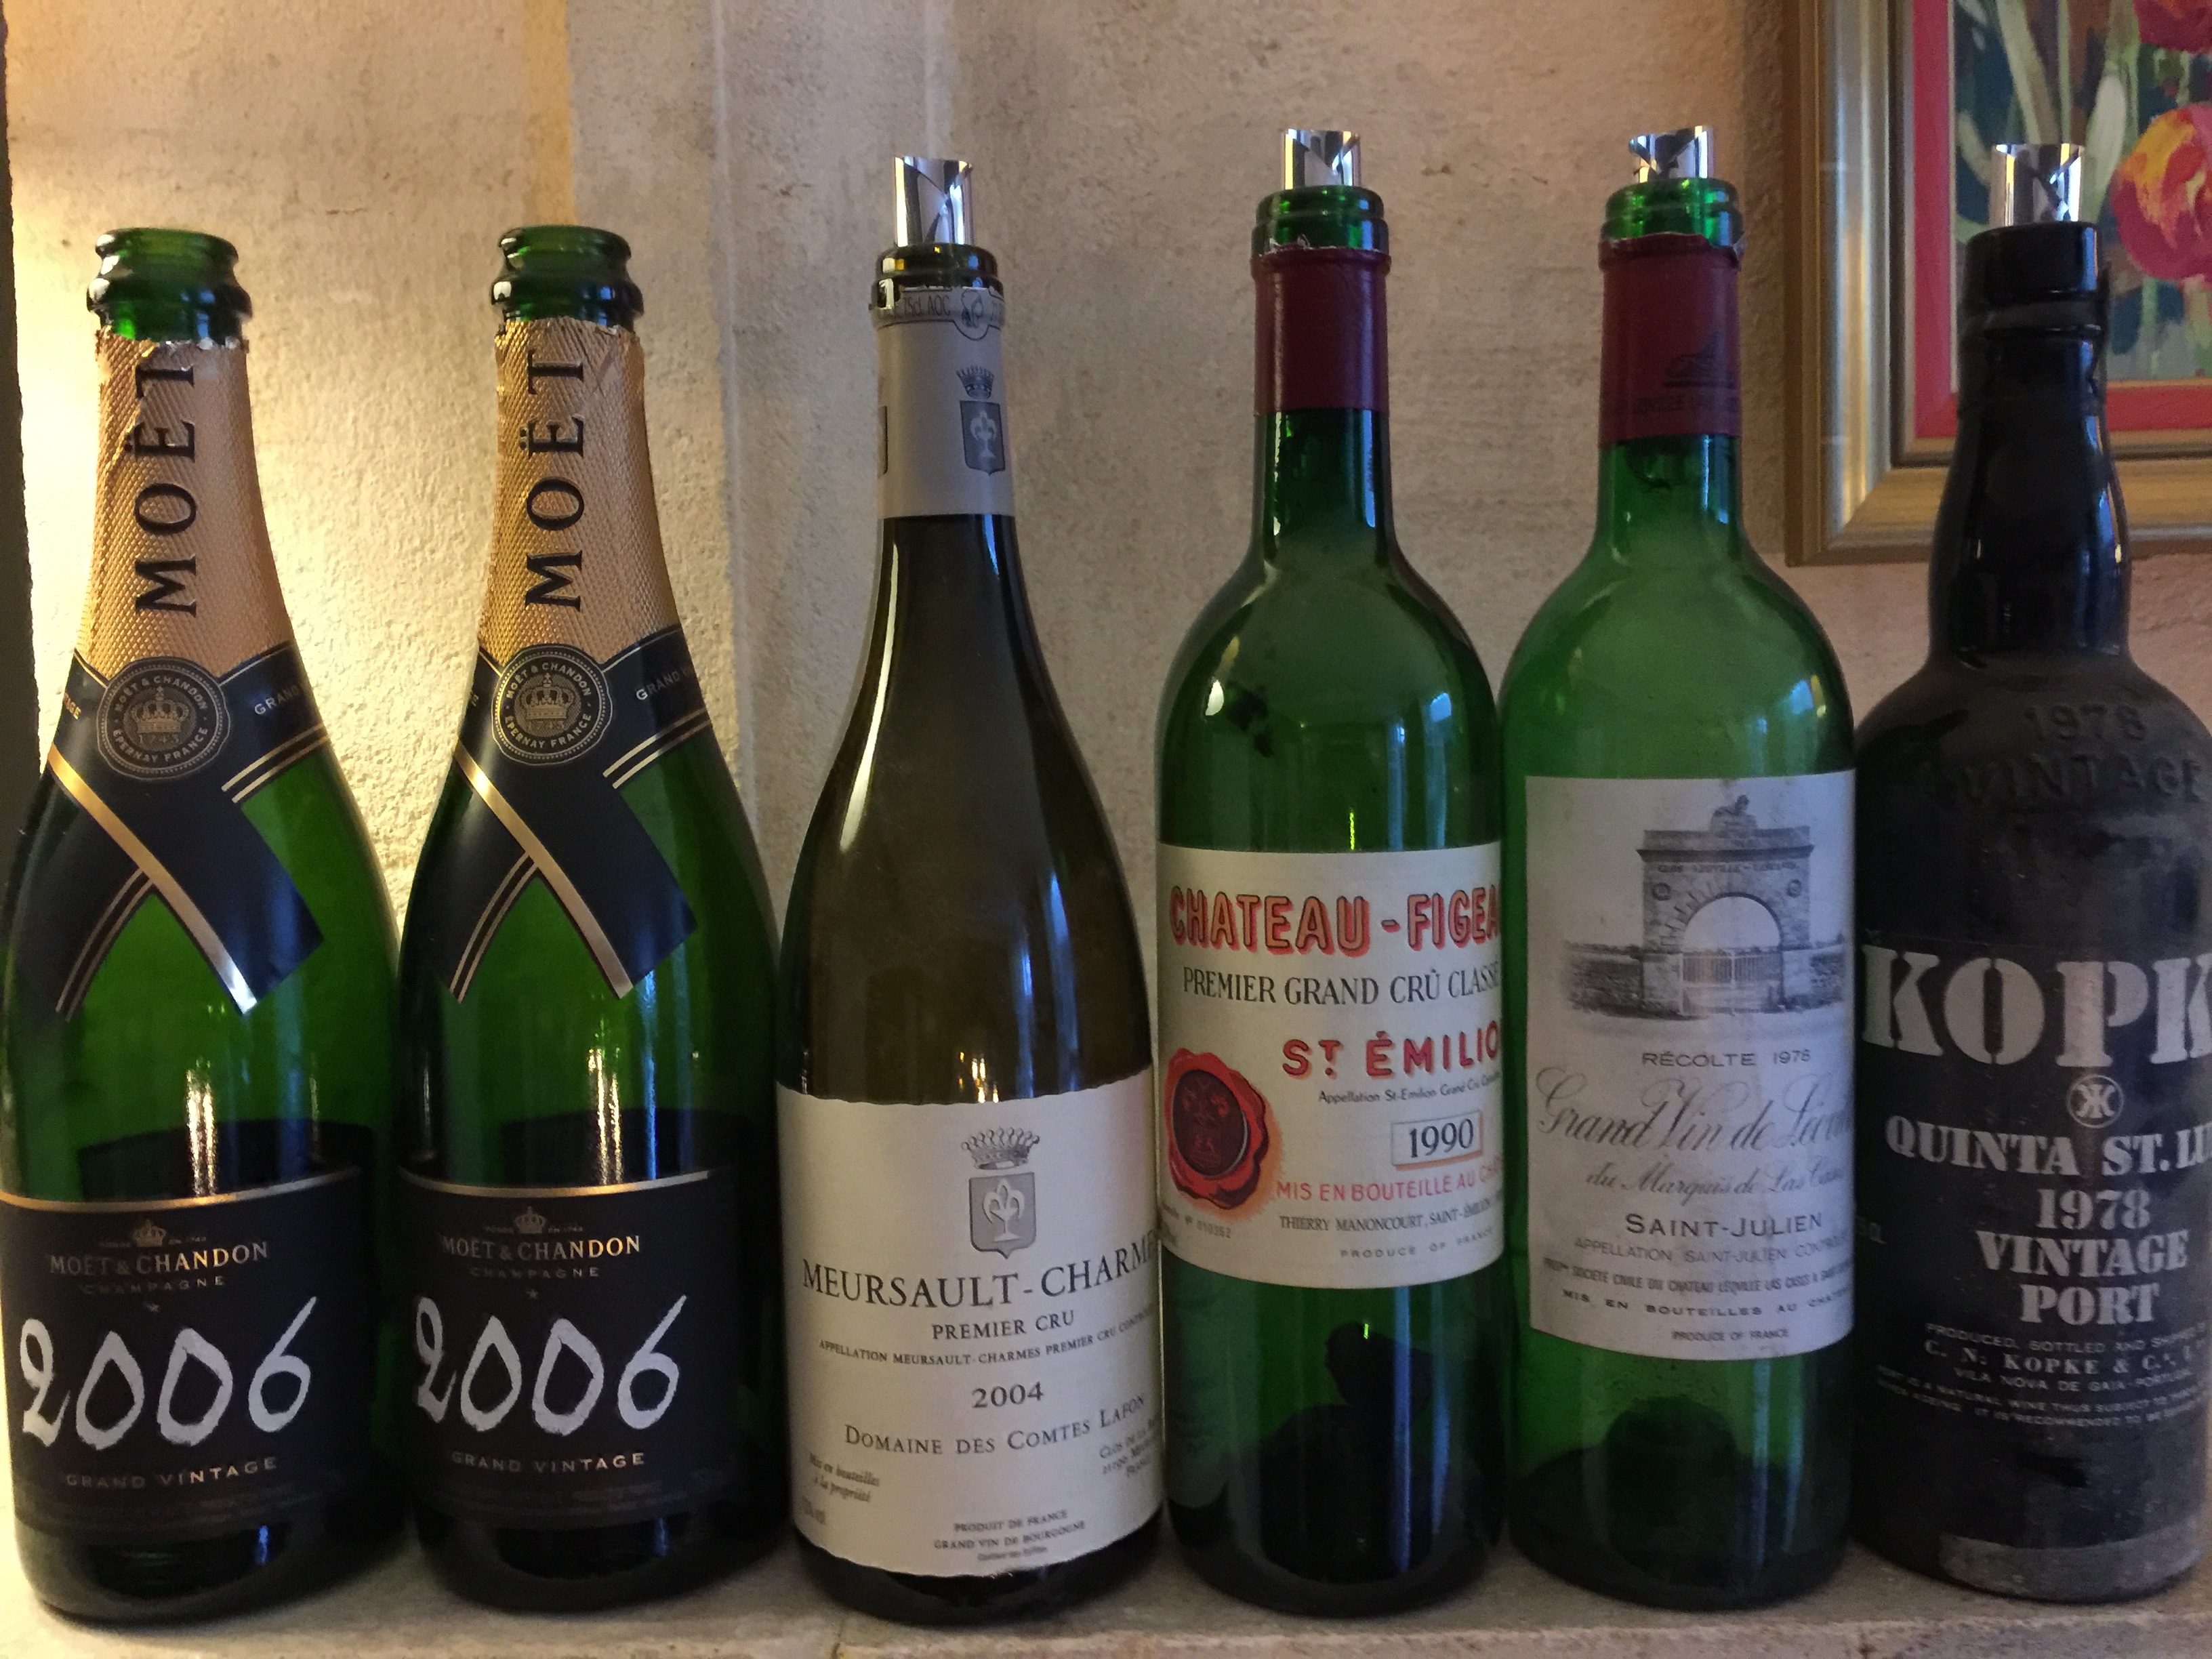 The score of this weekend's dinner party at our chateau